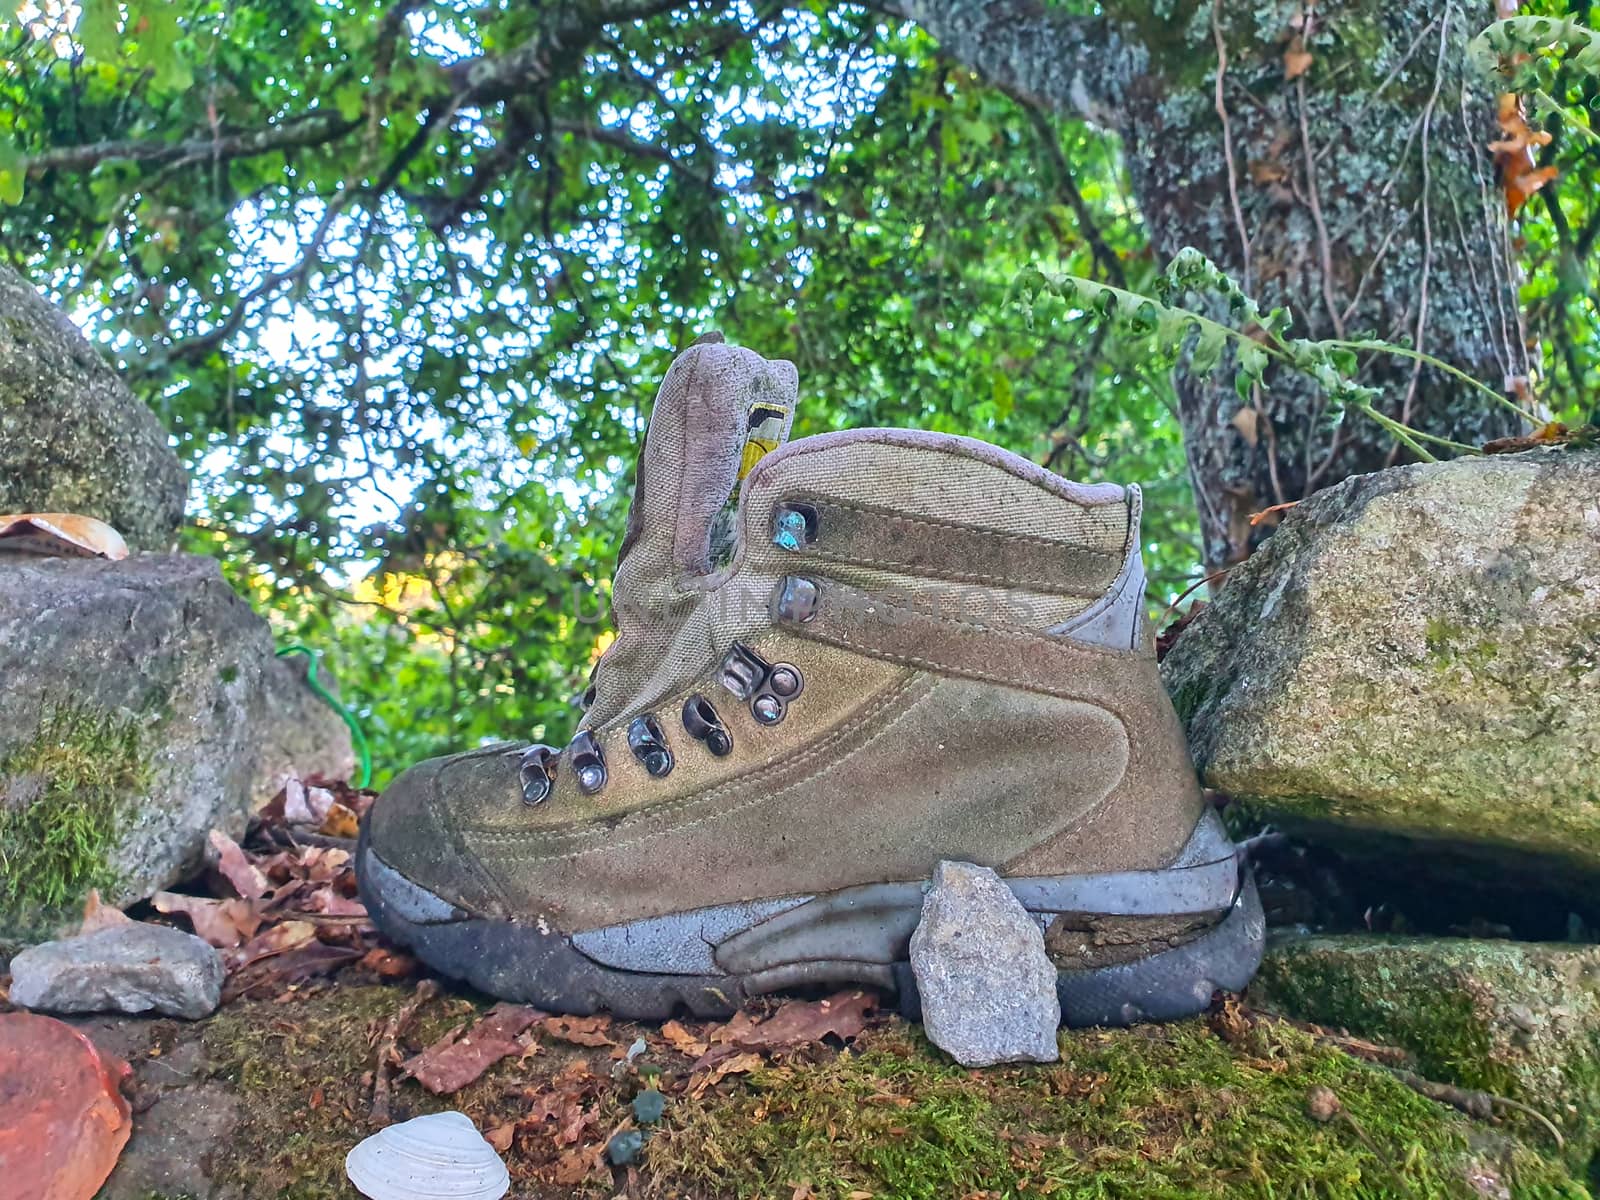 Well used garbage boot lost in the forest